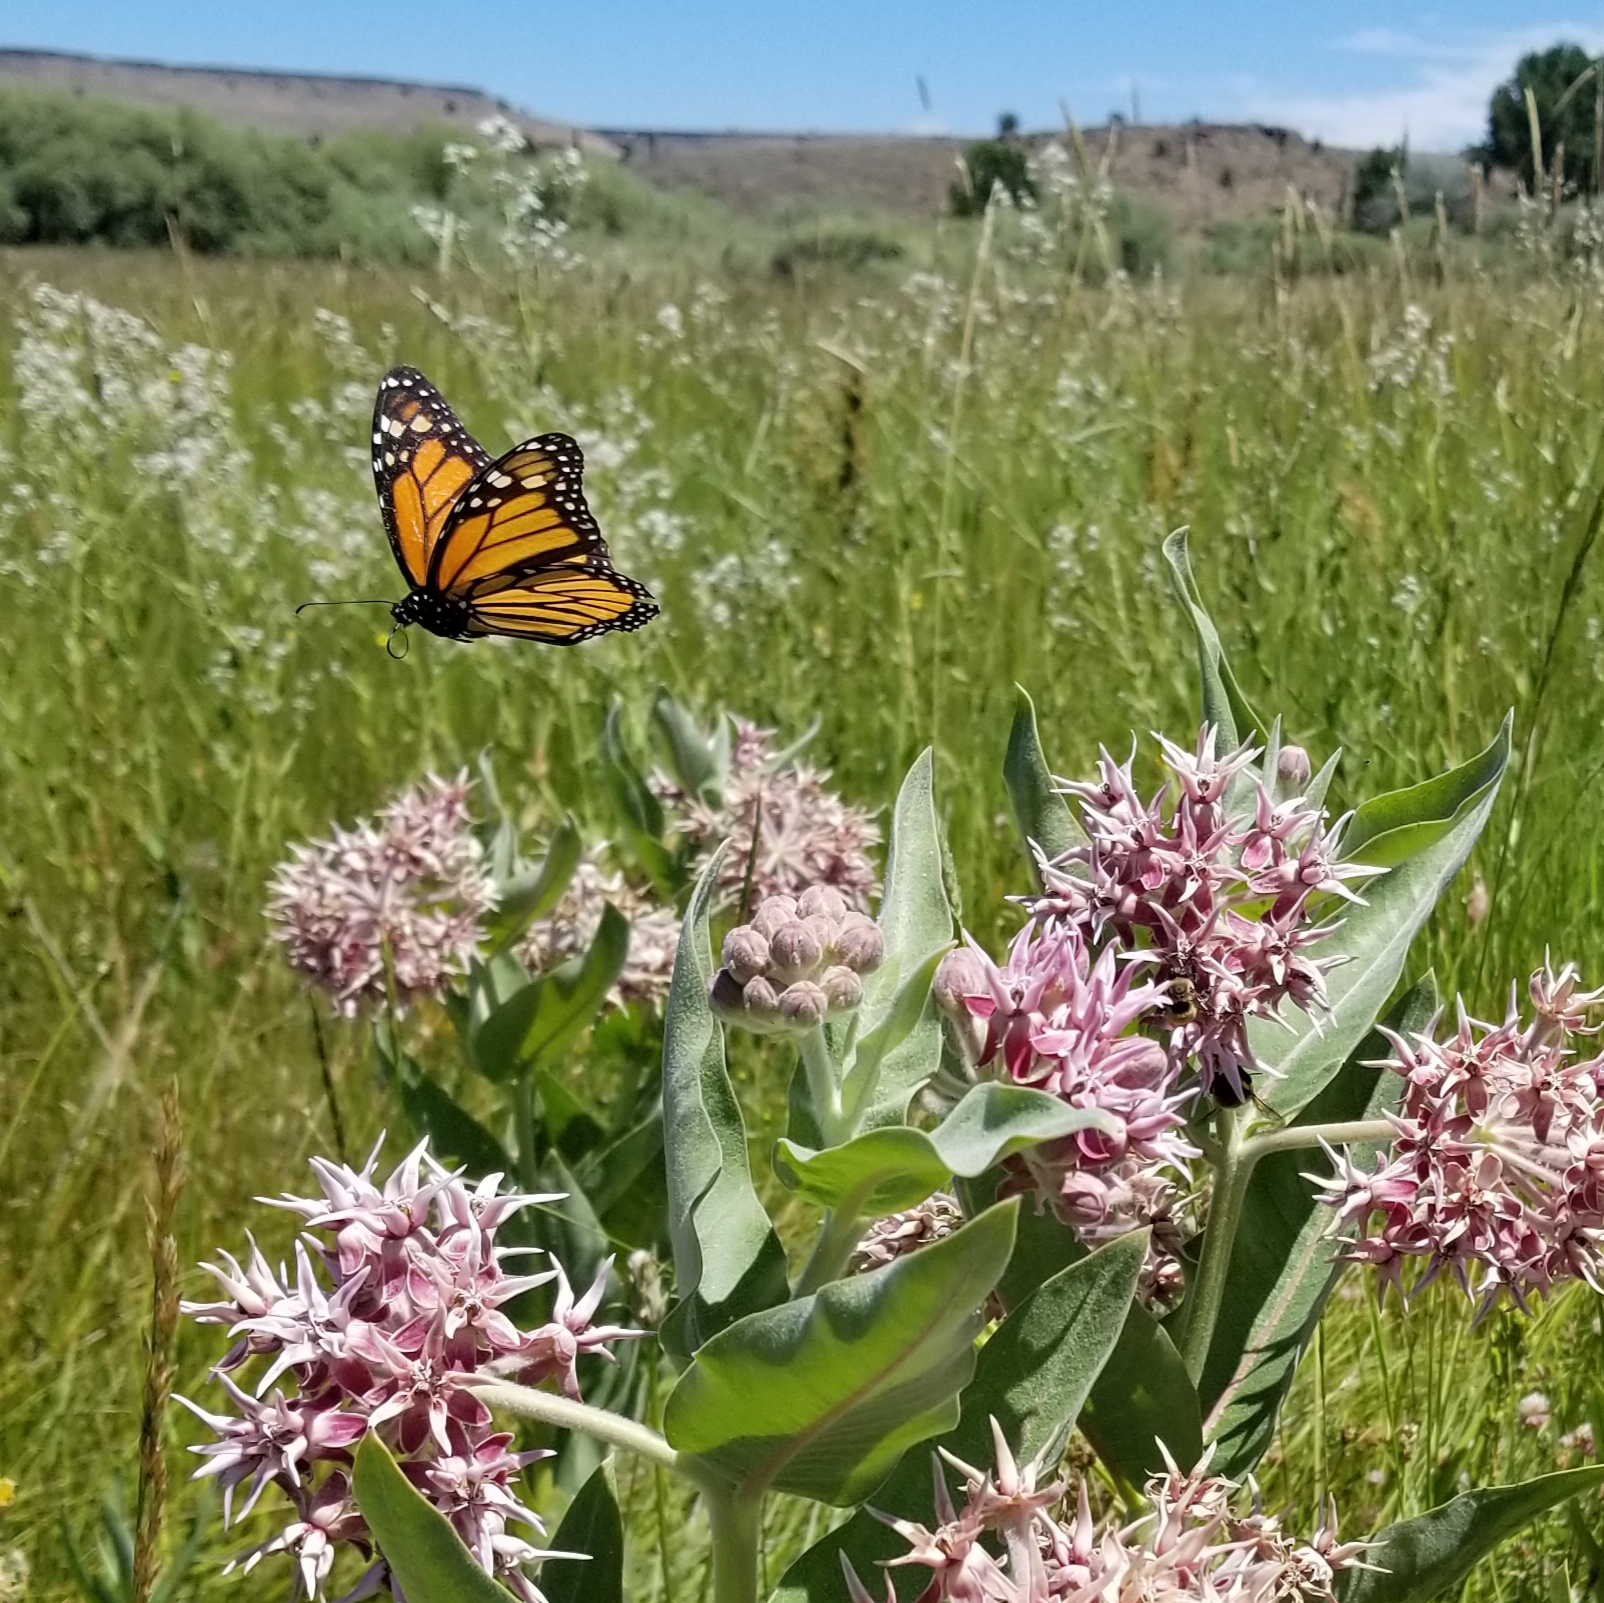 A bright orange monarch flutters over pink milkweed blossoms in a green, grassy landscape.